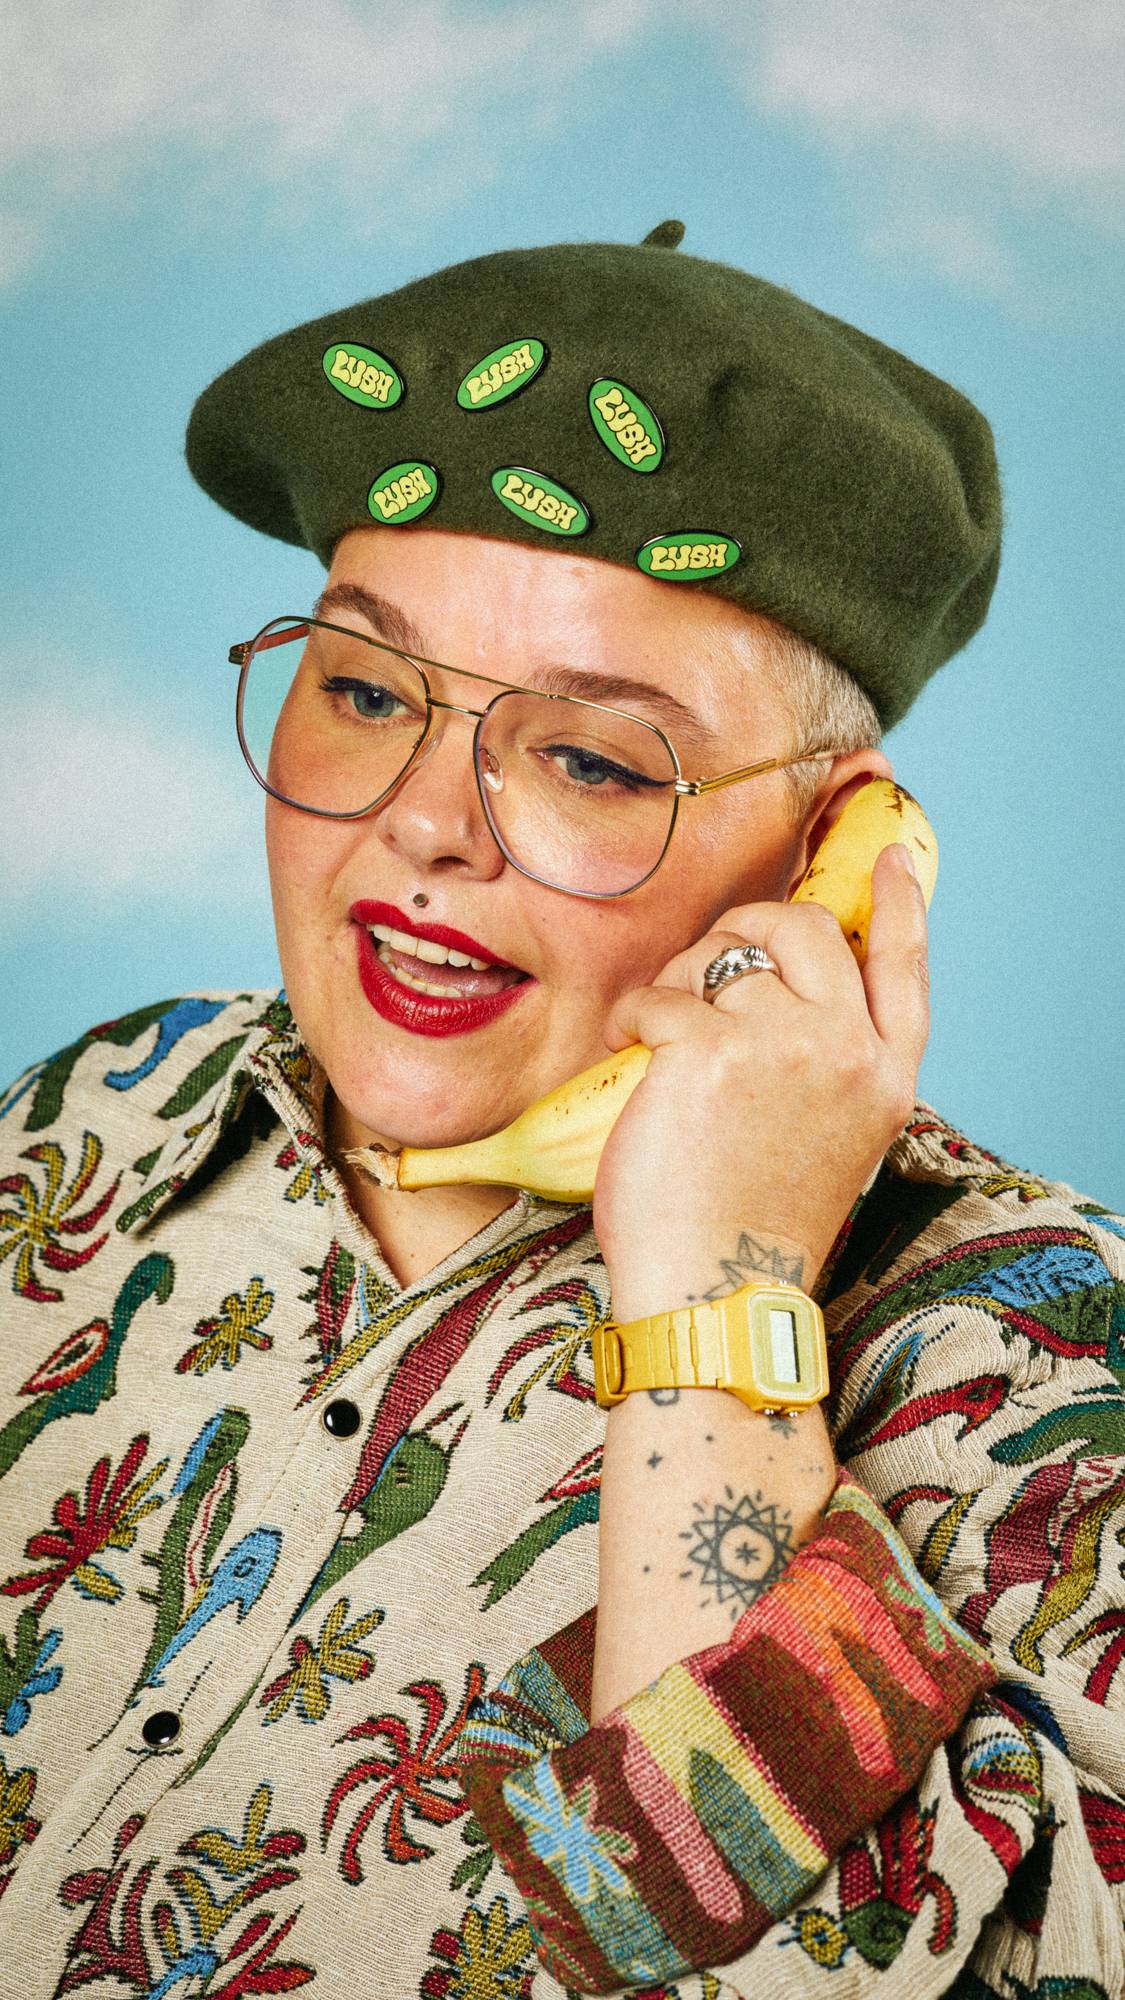 Model wears a bold shirt as they hold a banana to their face like a phone. They're wearing a green beret with multiple badges.